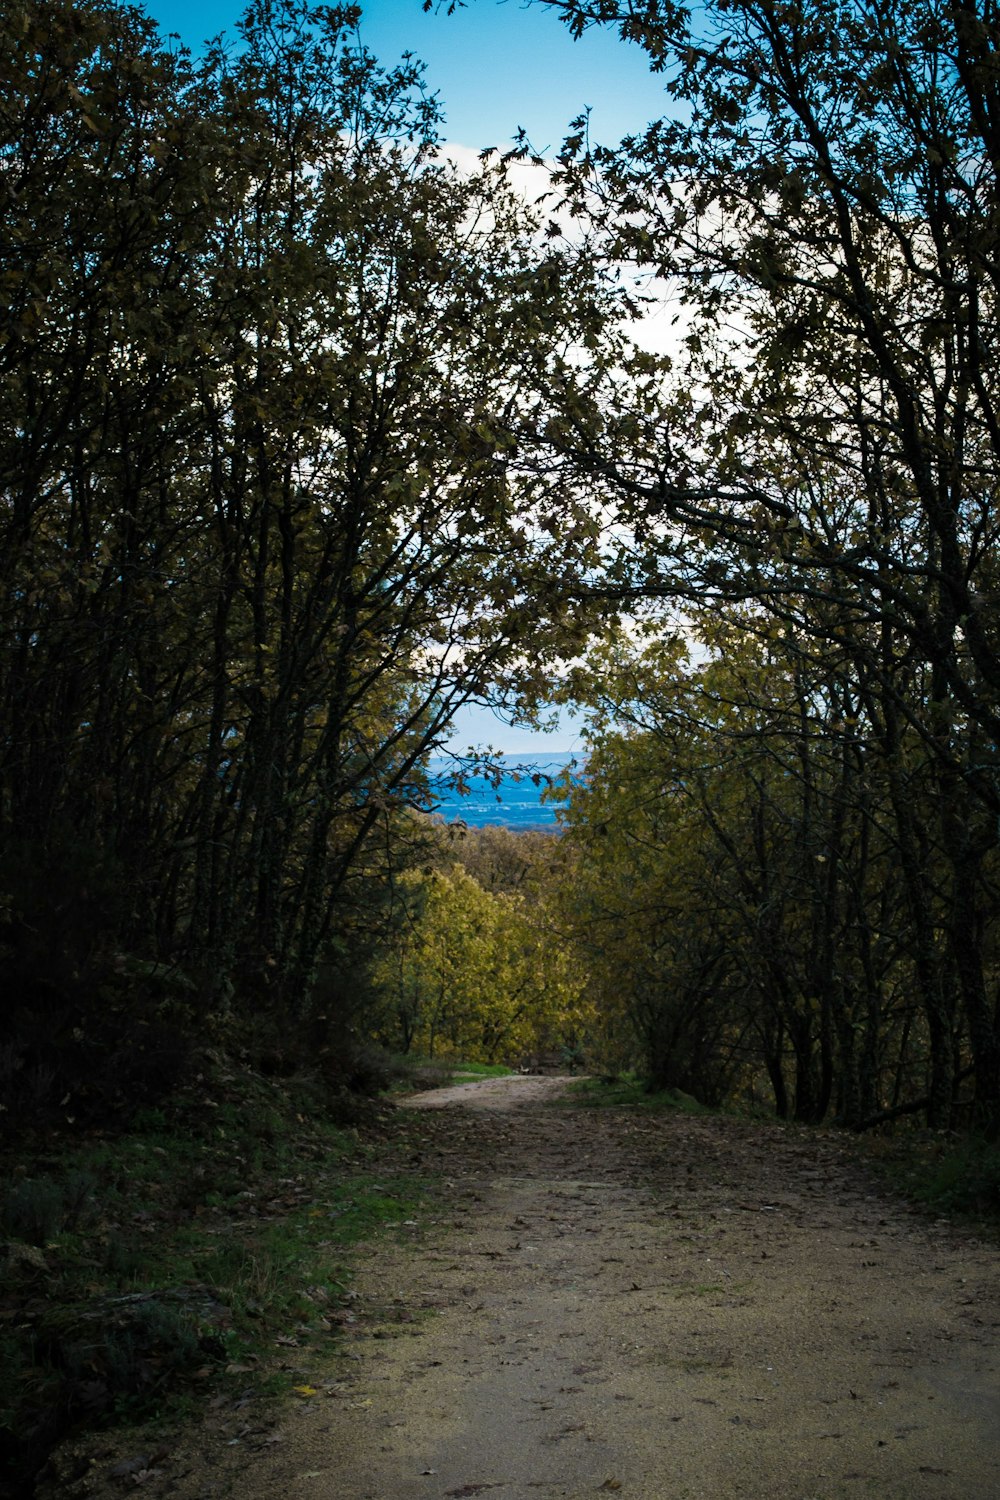 a dirt road surrounded by trees with a blue sky in the background